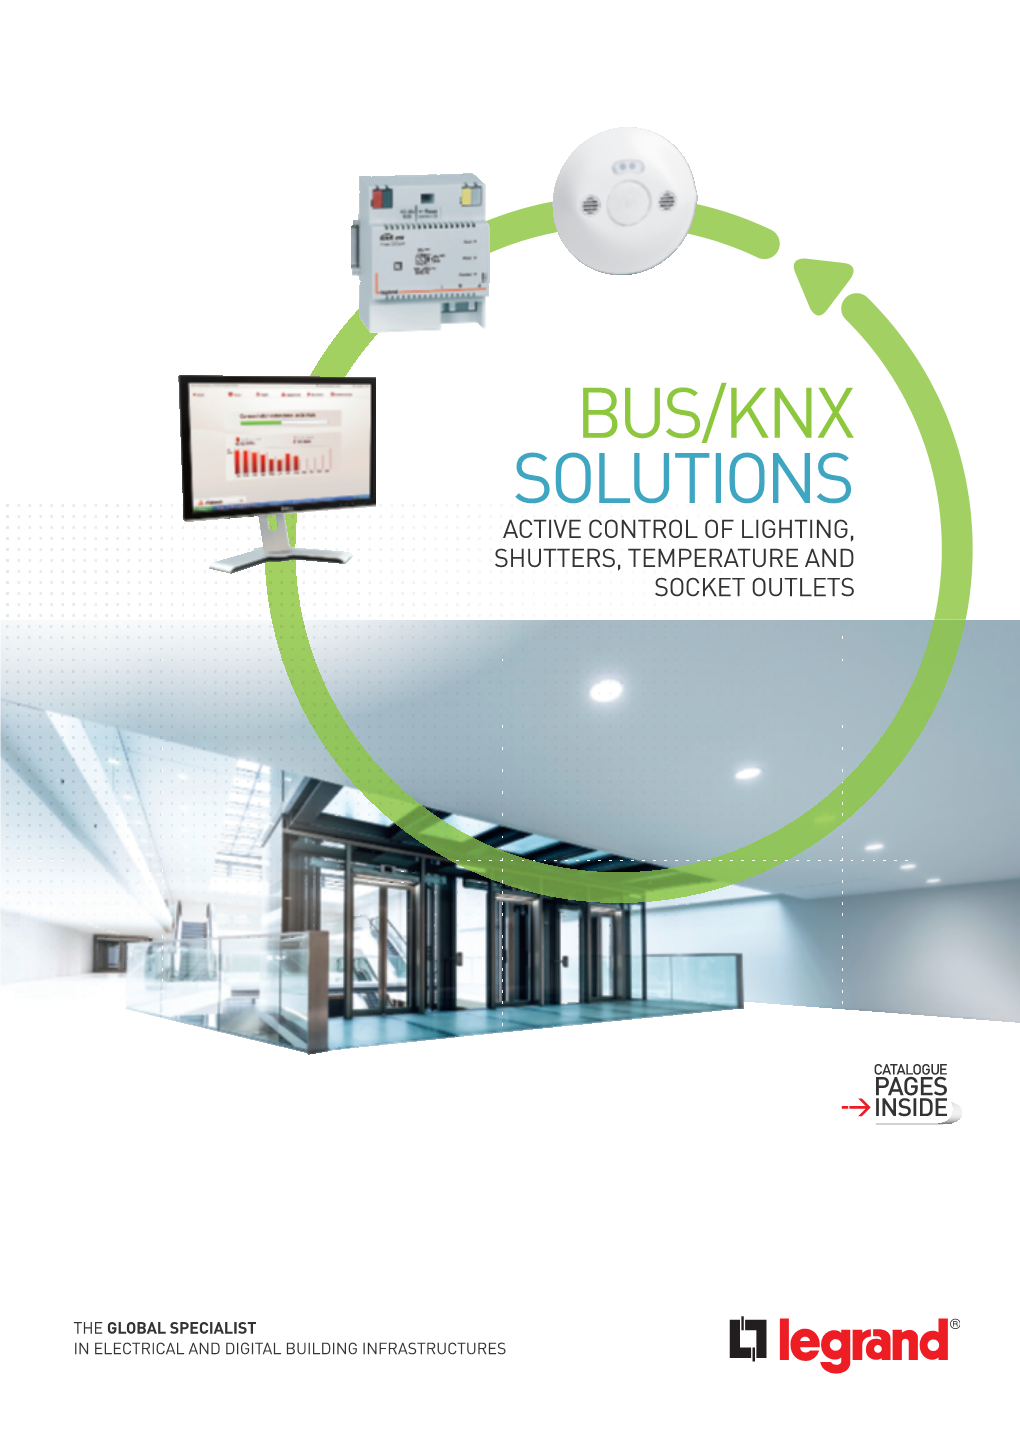 Bus/Knx Solutions Active Control of Lighting, Shutters, Temperature and Socket Outlets